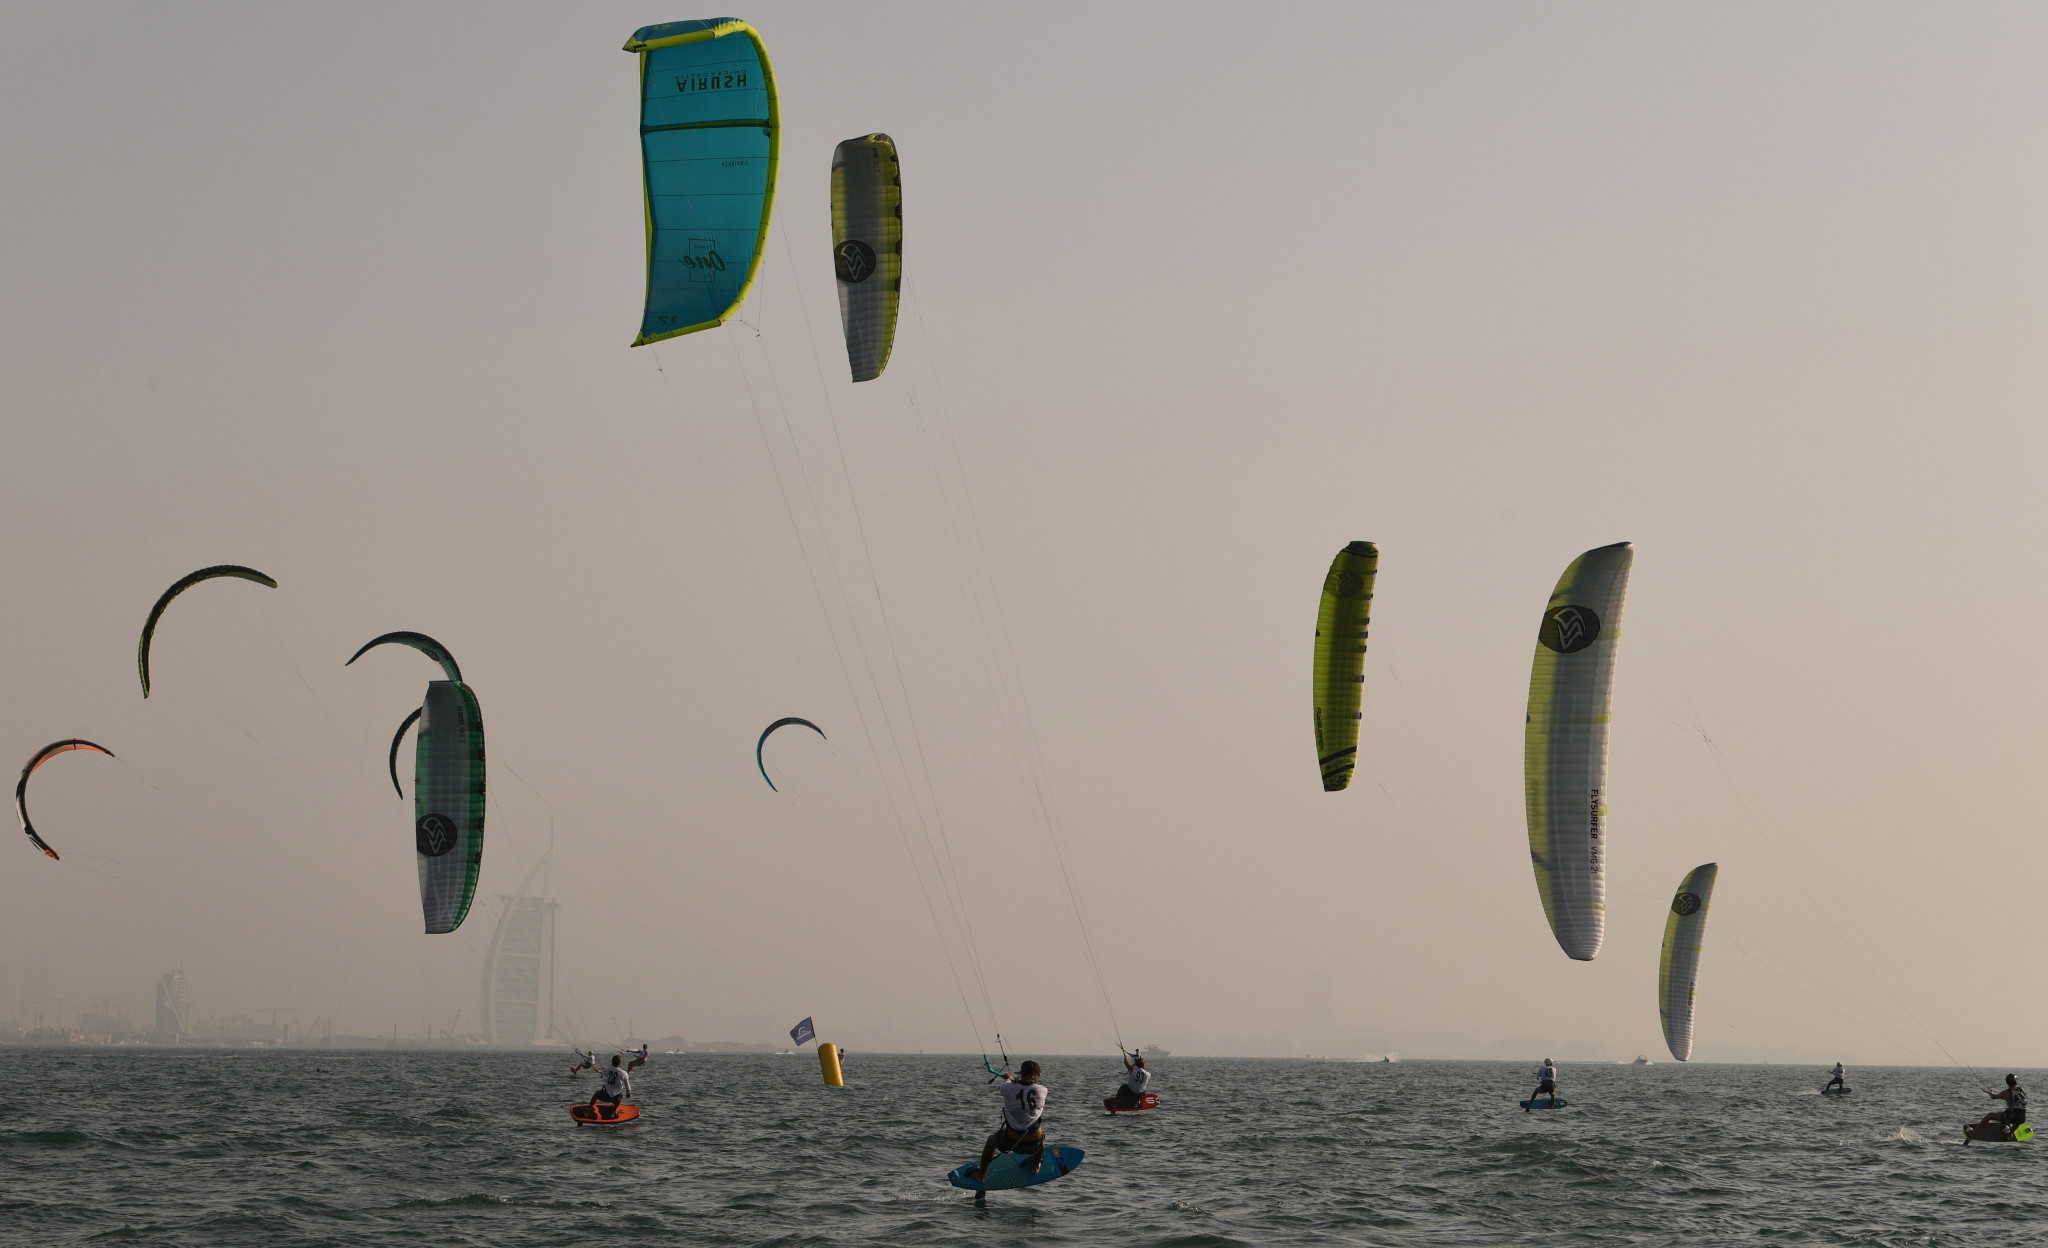 Kiteboarding will make its Olympic debut at Paris 2024 with two medal events ©Getty Images